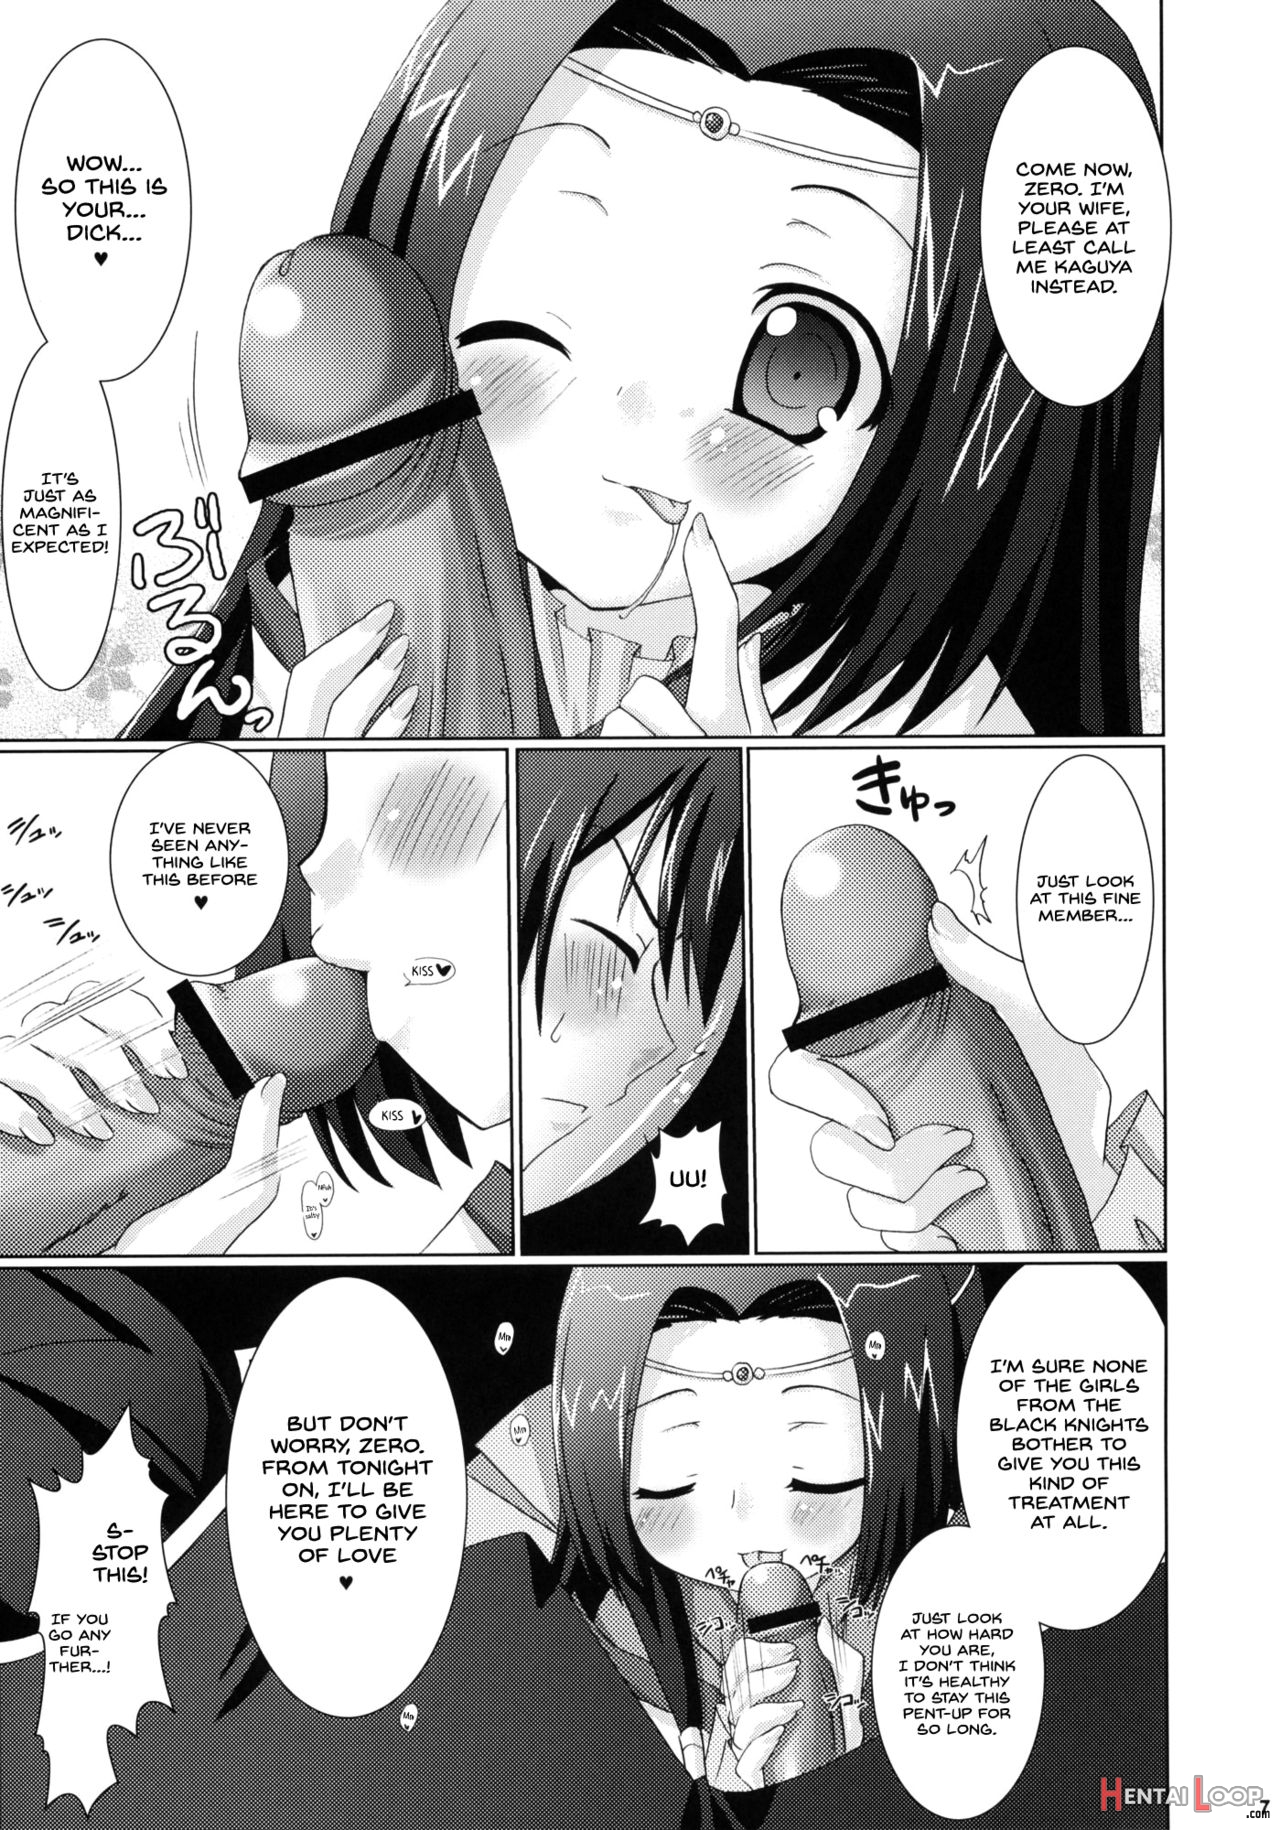 Kouhime Kyouhime page 7